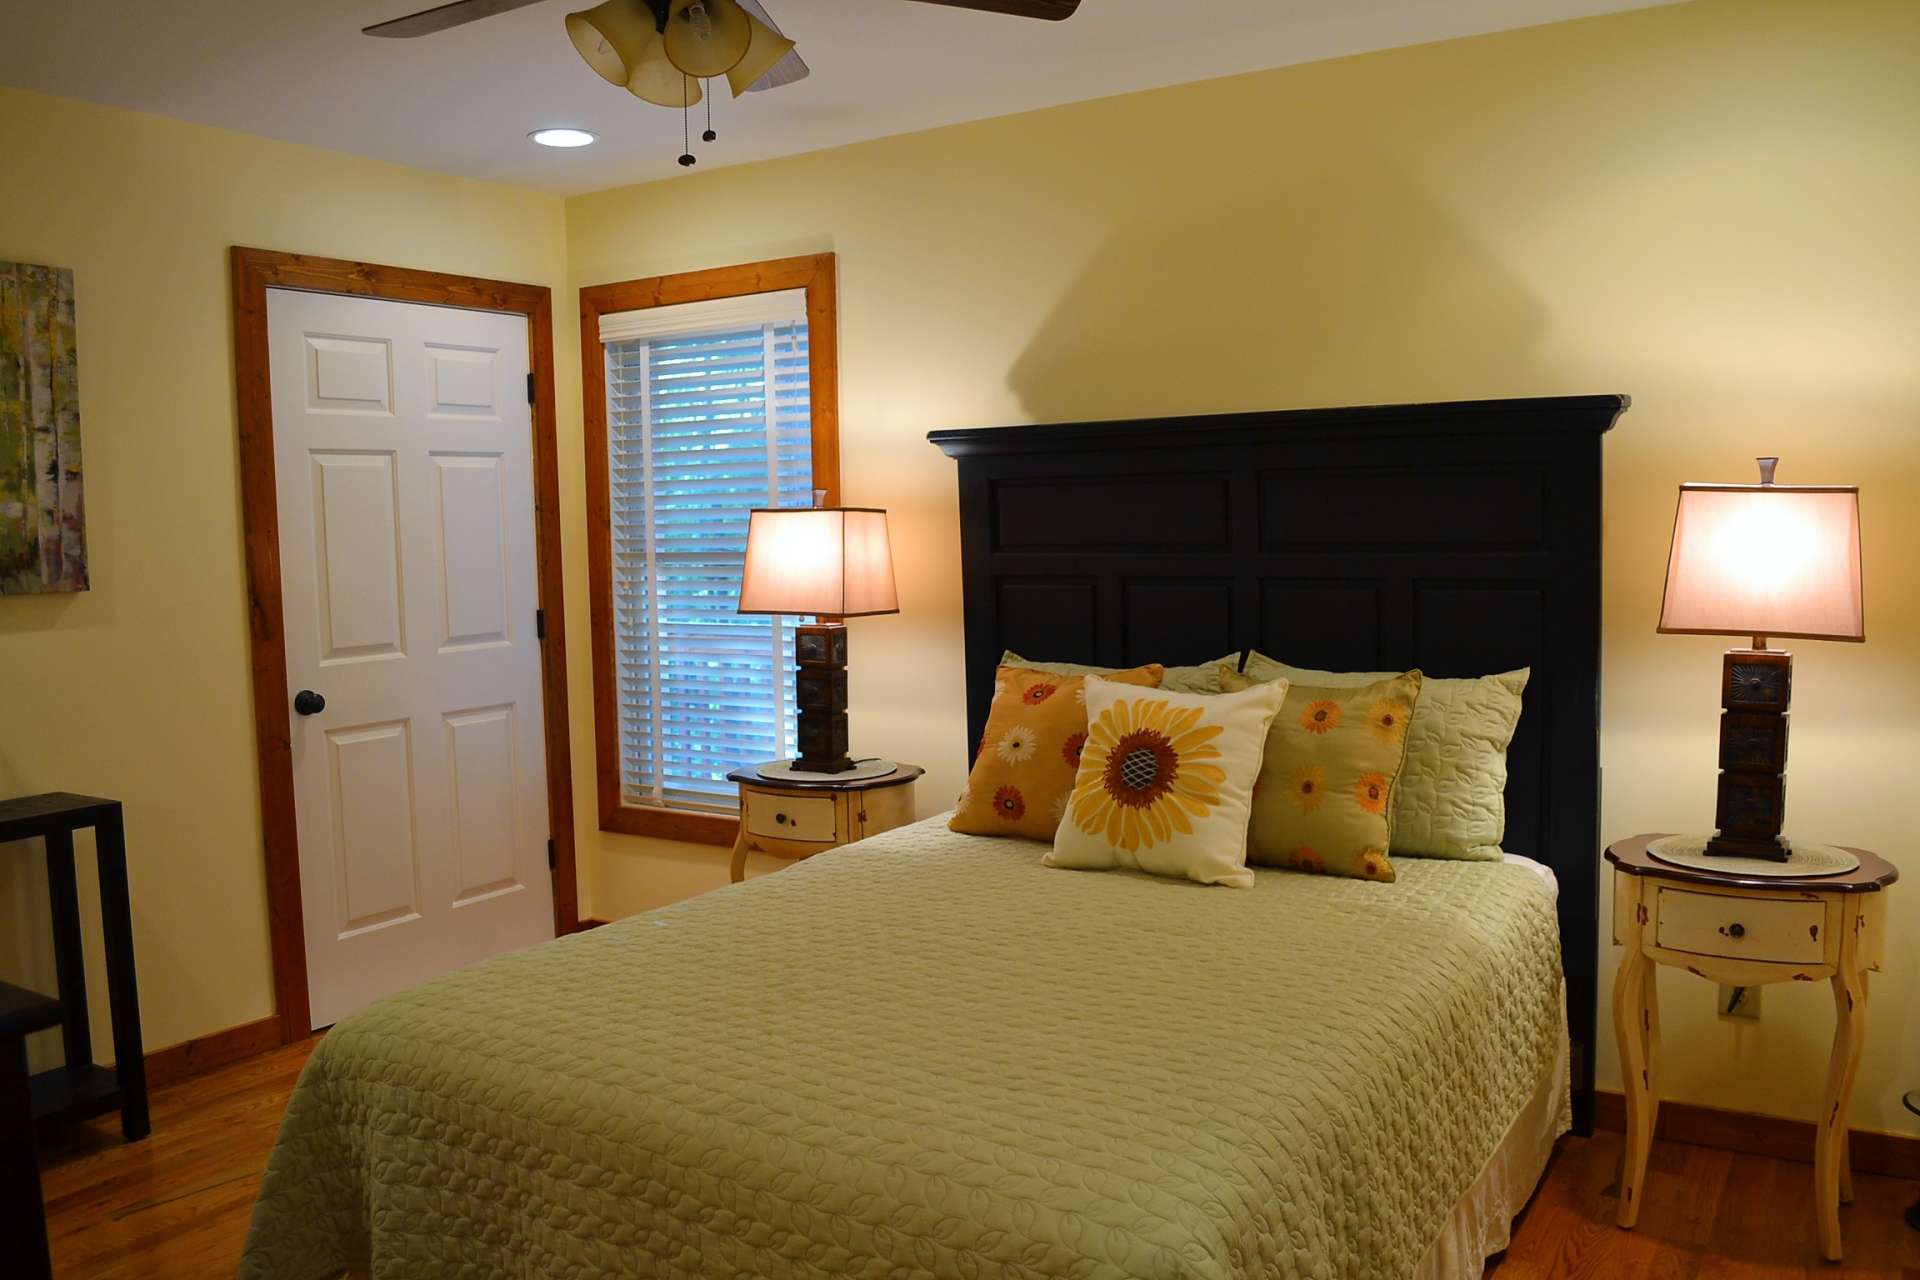 The guest bedroom is just as lovely and offers plenty of space for large bedroom furniture.